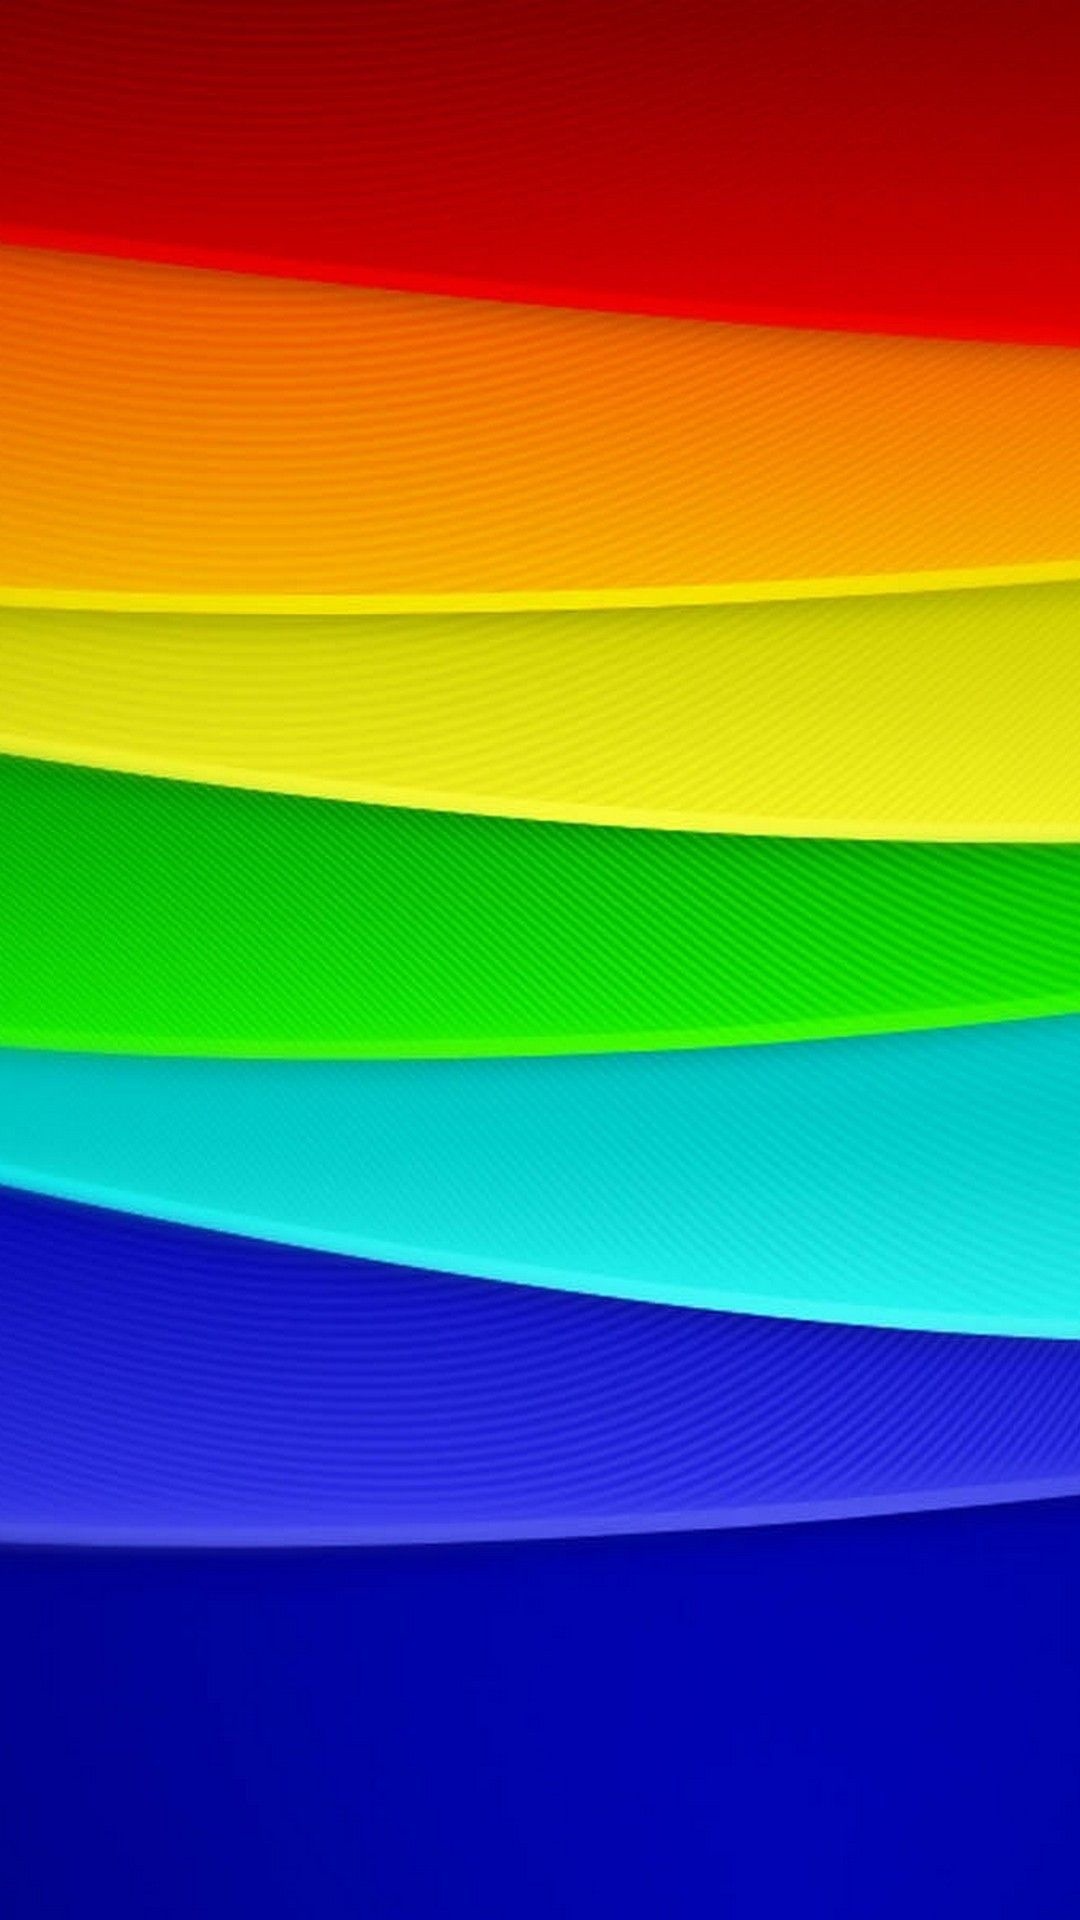 Rainbow phone wallpapers, Cool and vibrant, Colorful and eye-catching, Trendy mobile backgrounds, 1080x1920 Full HD Handy